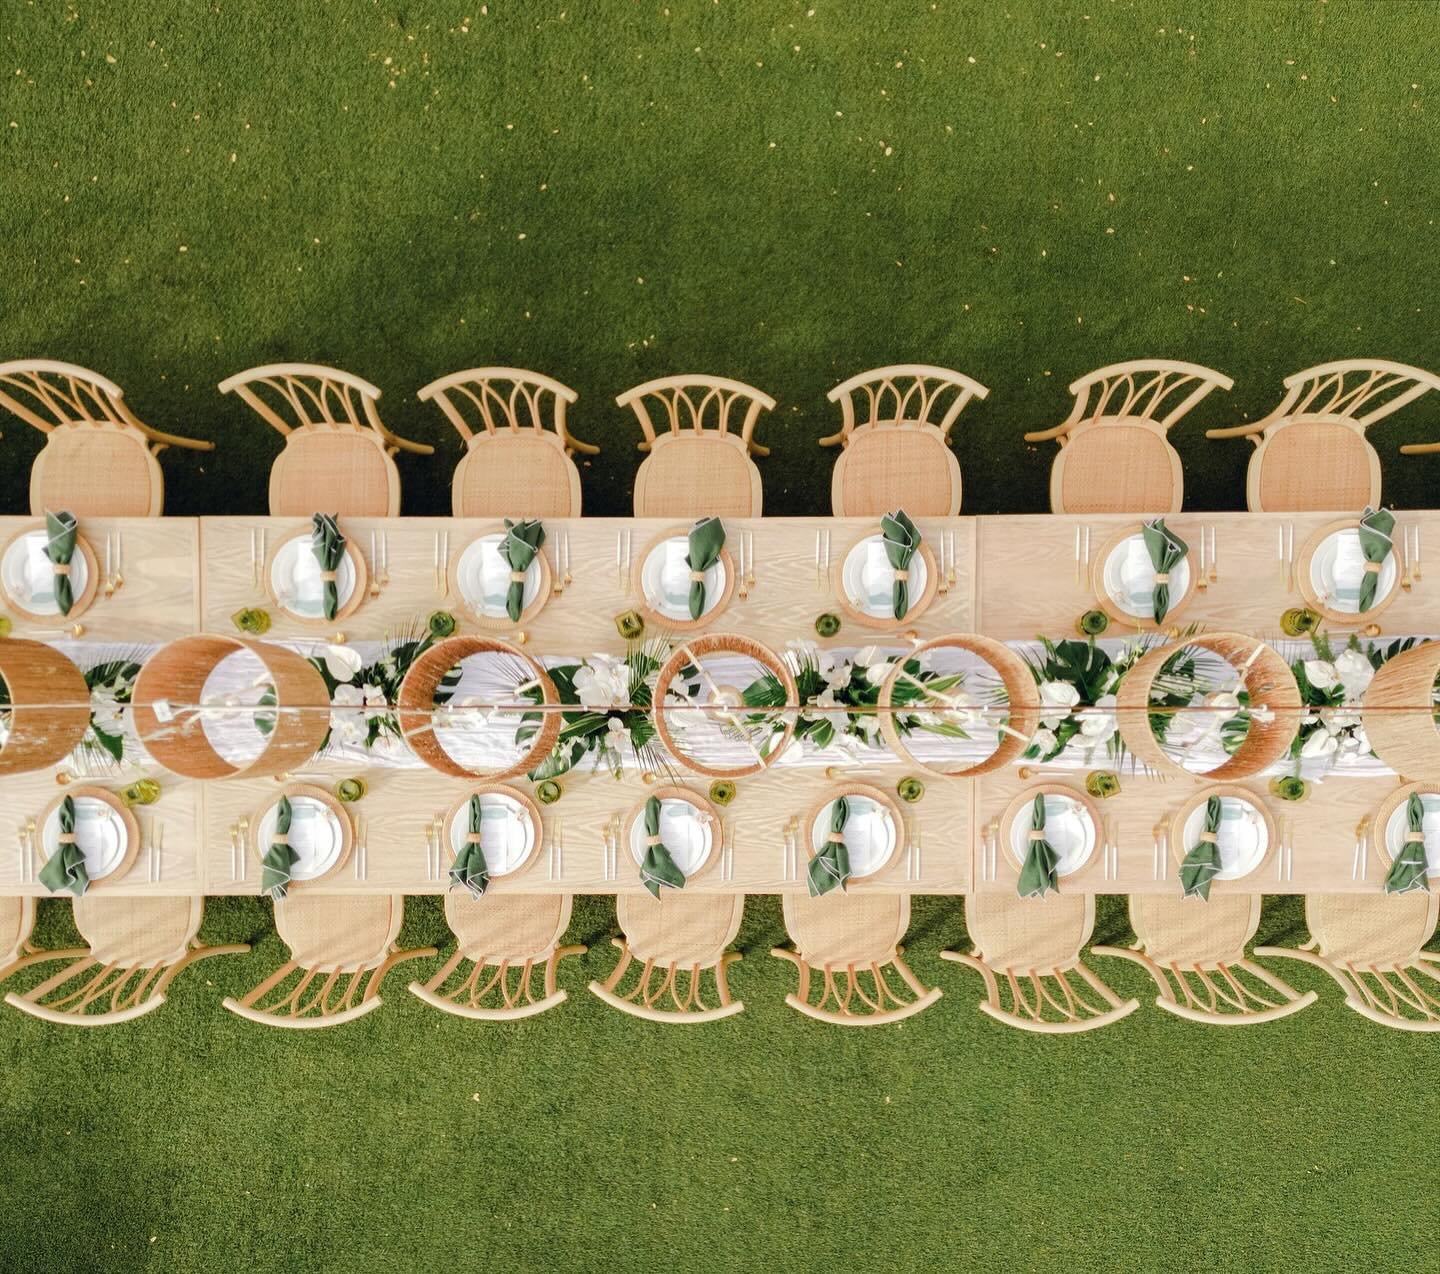 In love with this intimate wedding reception featuring tropical white and green floral details at Gather on Maui in Wailea, Hawaii!

Event Design &amp; Coordination @whiteorchidwedding 
Venue @gathermauiweddingsevents 
Photography @marylanestudios 
R